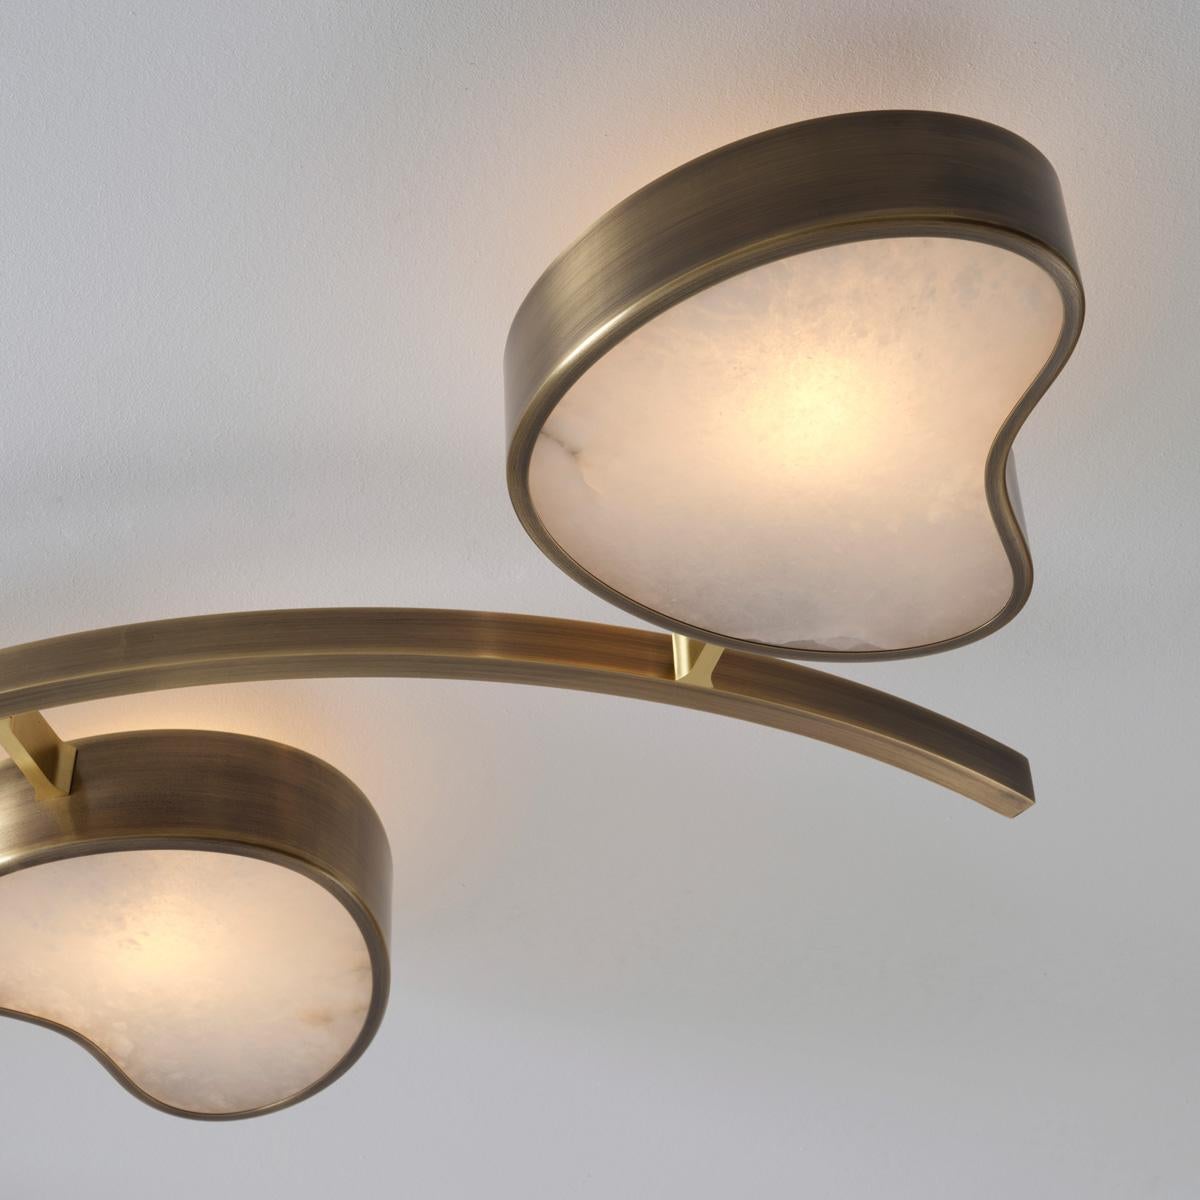 Cuore N.6 Ceiling Light by Gaspare Asaro. Satin Brass and Sand White Finish For Sale 3